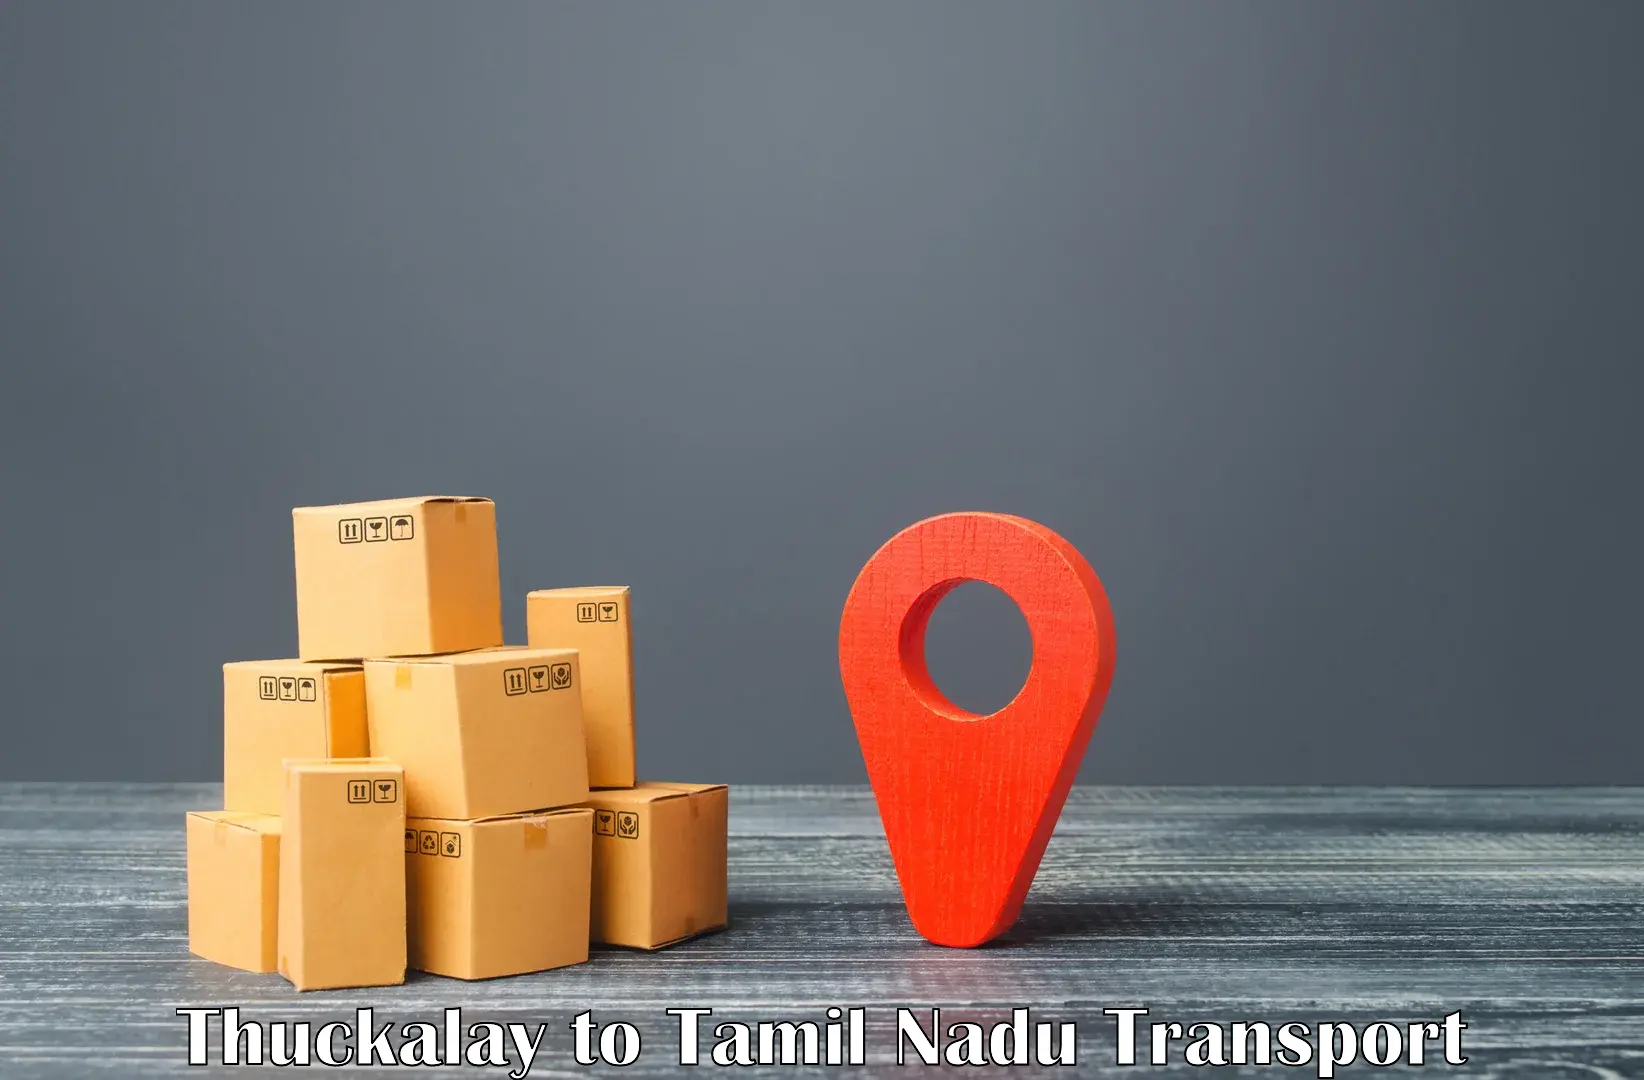 Online transport booking Thuckalay to Peralam